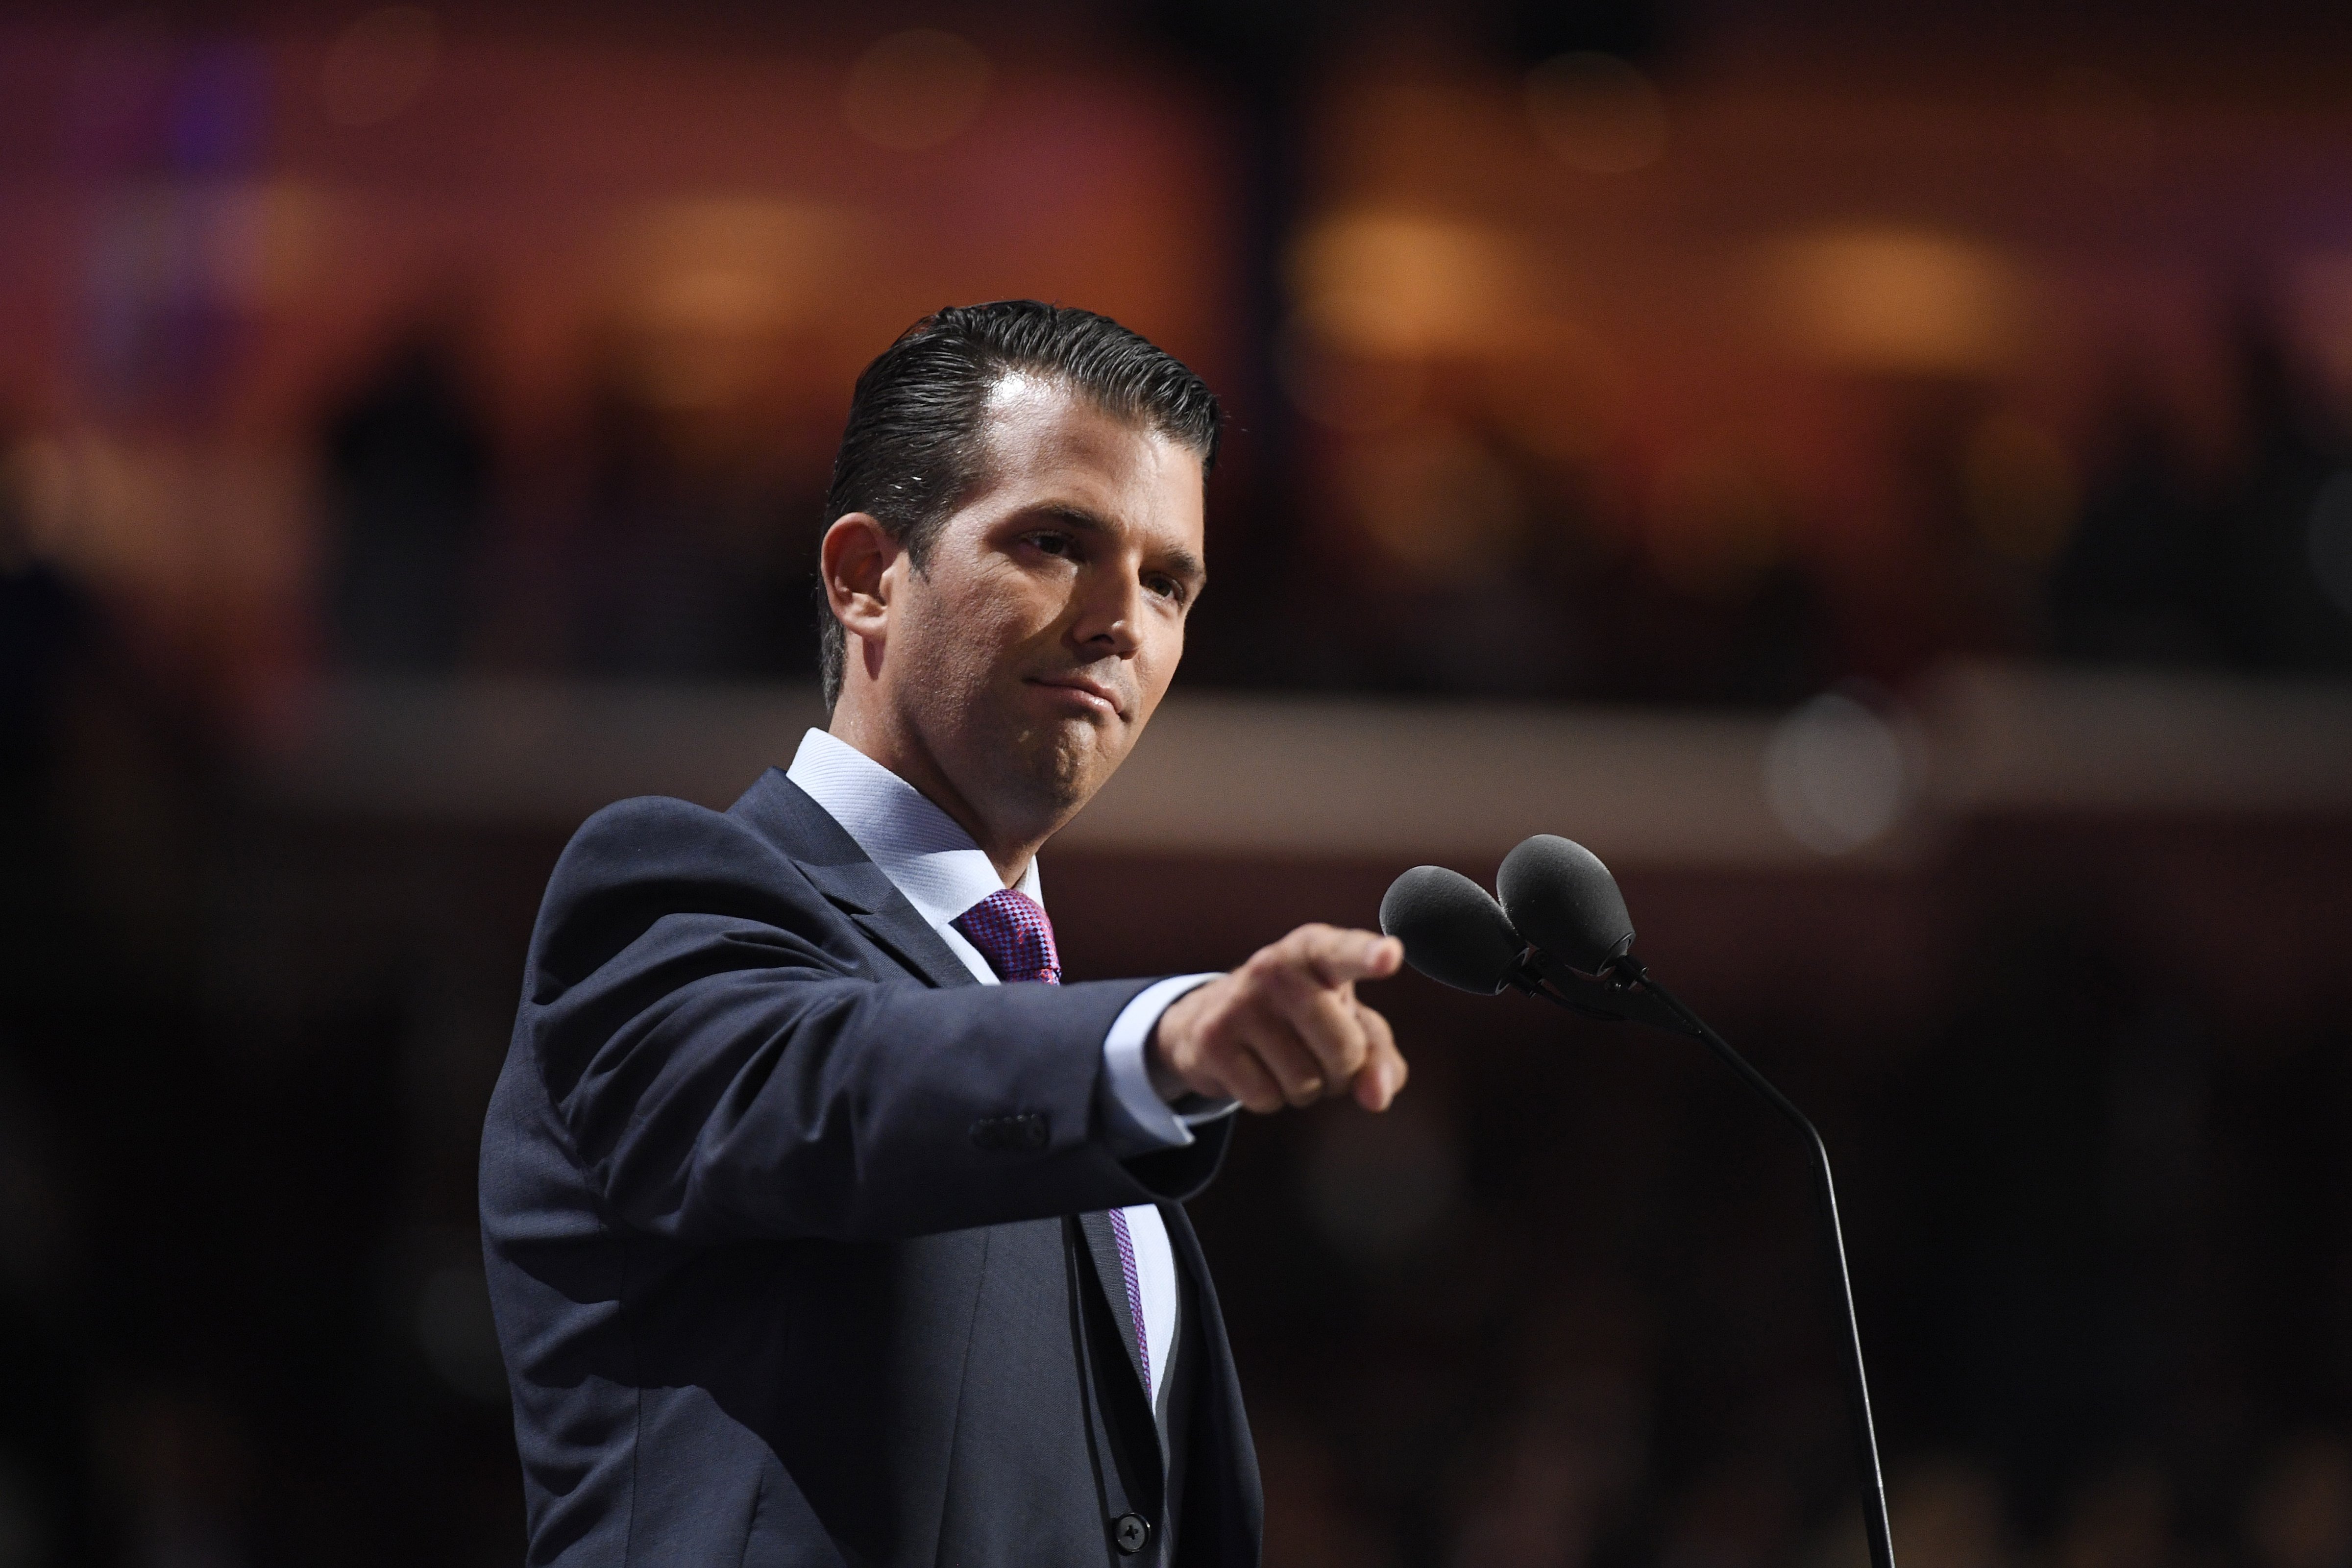 Donald Trump Jr. at the Republican National Convention (RNC) in Cleveland, Ohio, U.S., on Tuesday, July 19, 2016 (David Paul Morris—Bloomberg / Getty Images)